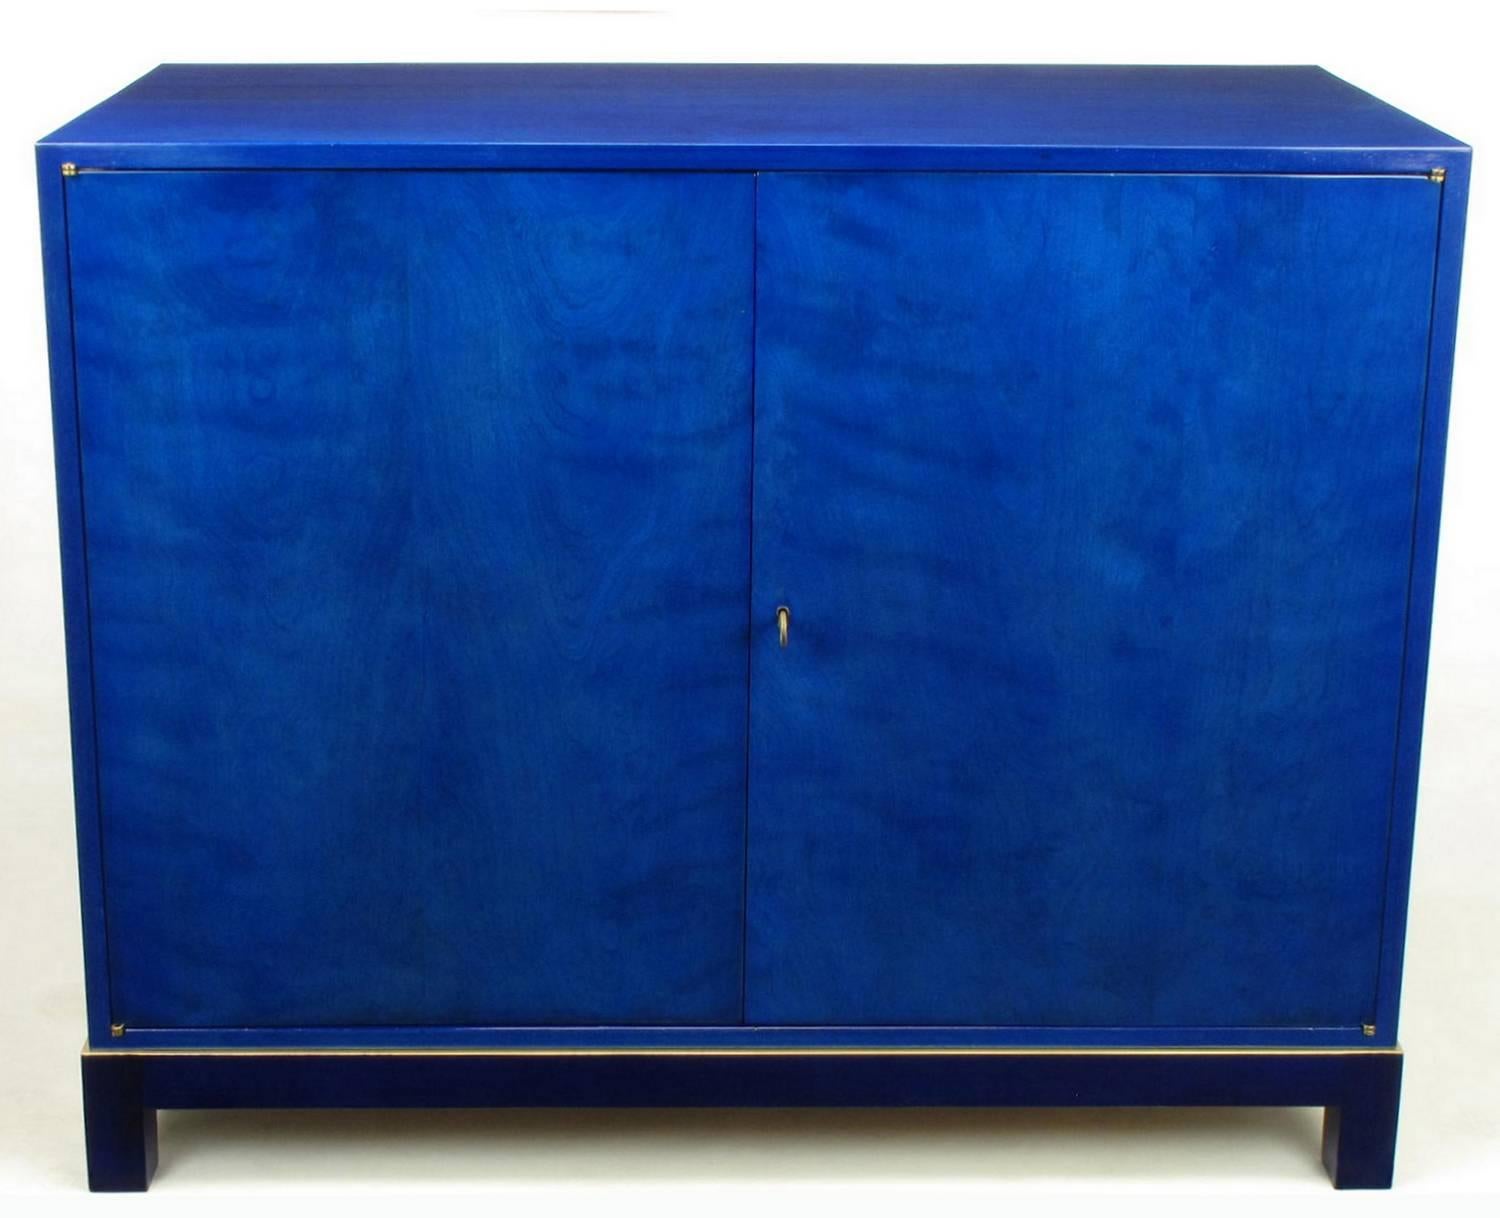 Pair of restored early Baker Furniture sideboard cabinets dyed a beautiful lapis lazuli blue with parcel-gilt midnight blue bases. One cabinet features fourteen lined drawers for flatware. The other cabinet contains a pair of shelves for hollow